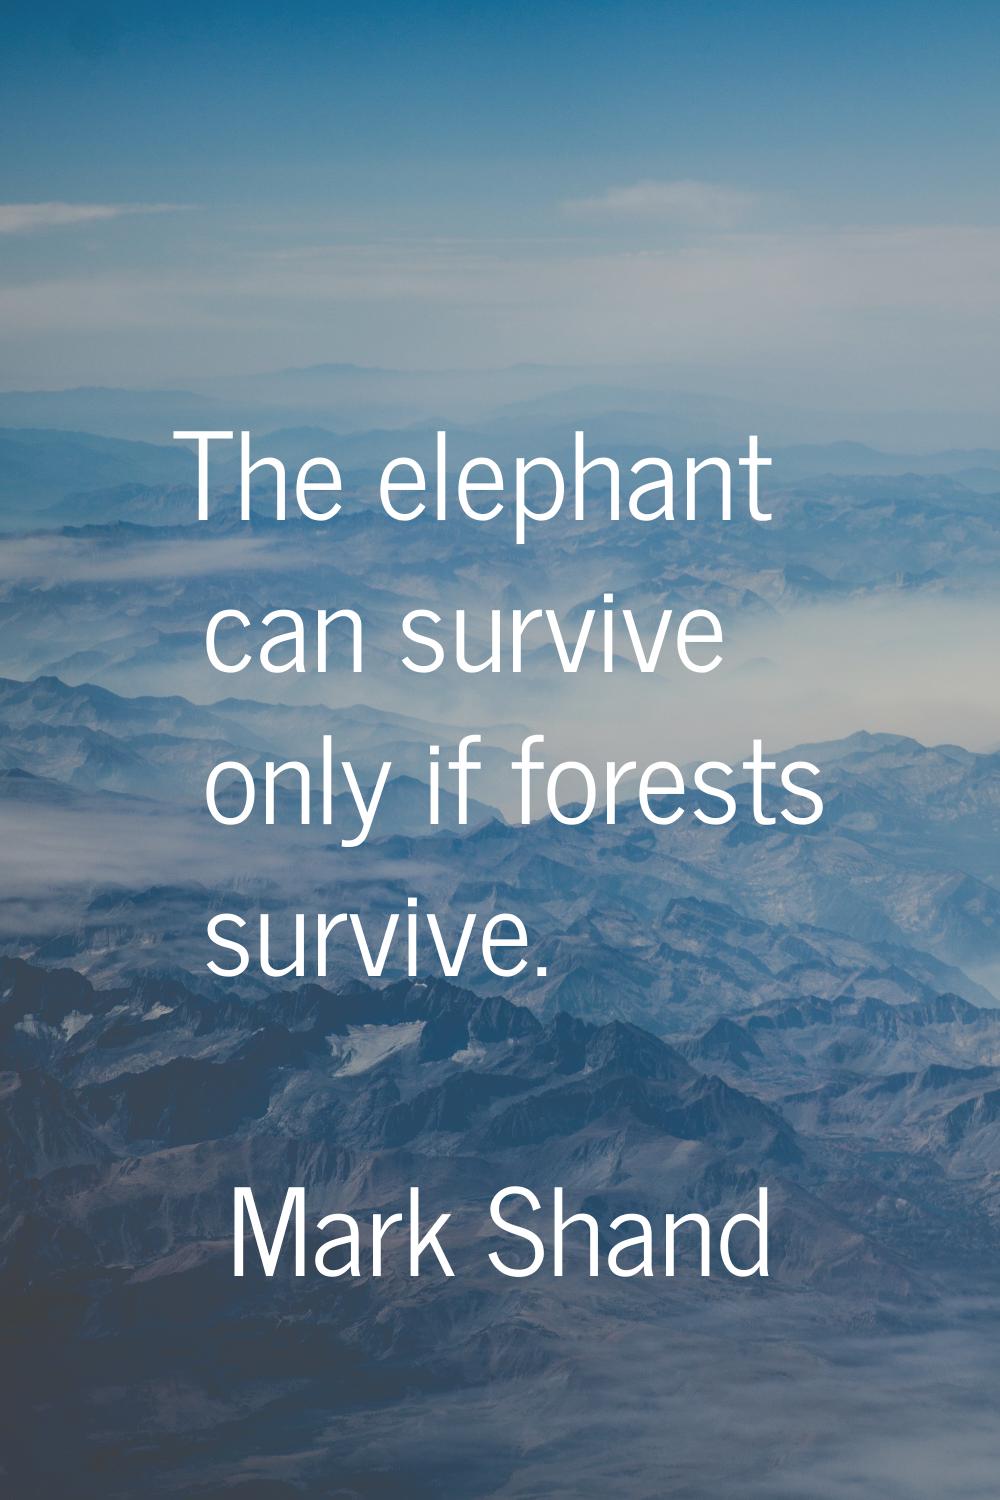 The elephant can survive only if forests survive.